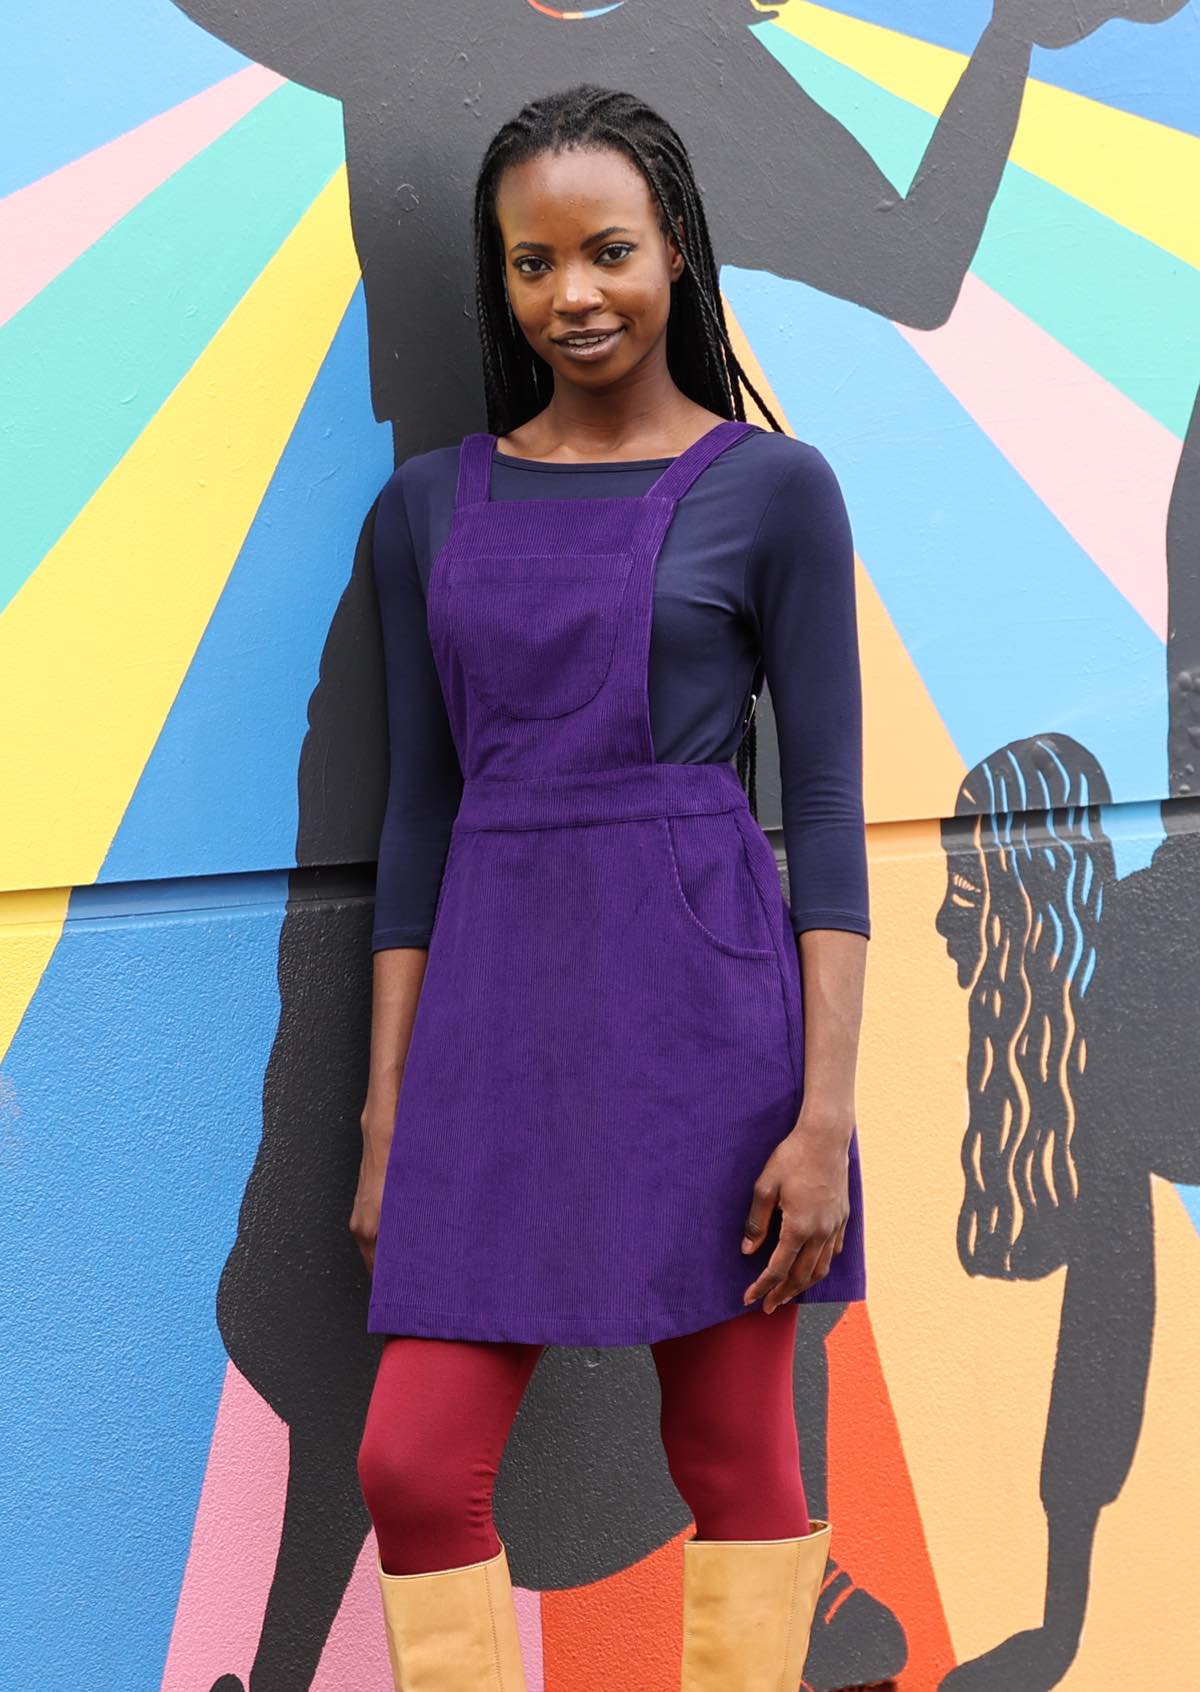 woman wearing purple cotton corduroy pinafore over navy blue top and maroon leggings  leaning against bright painted wall